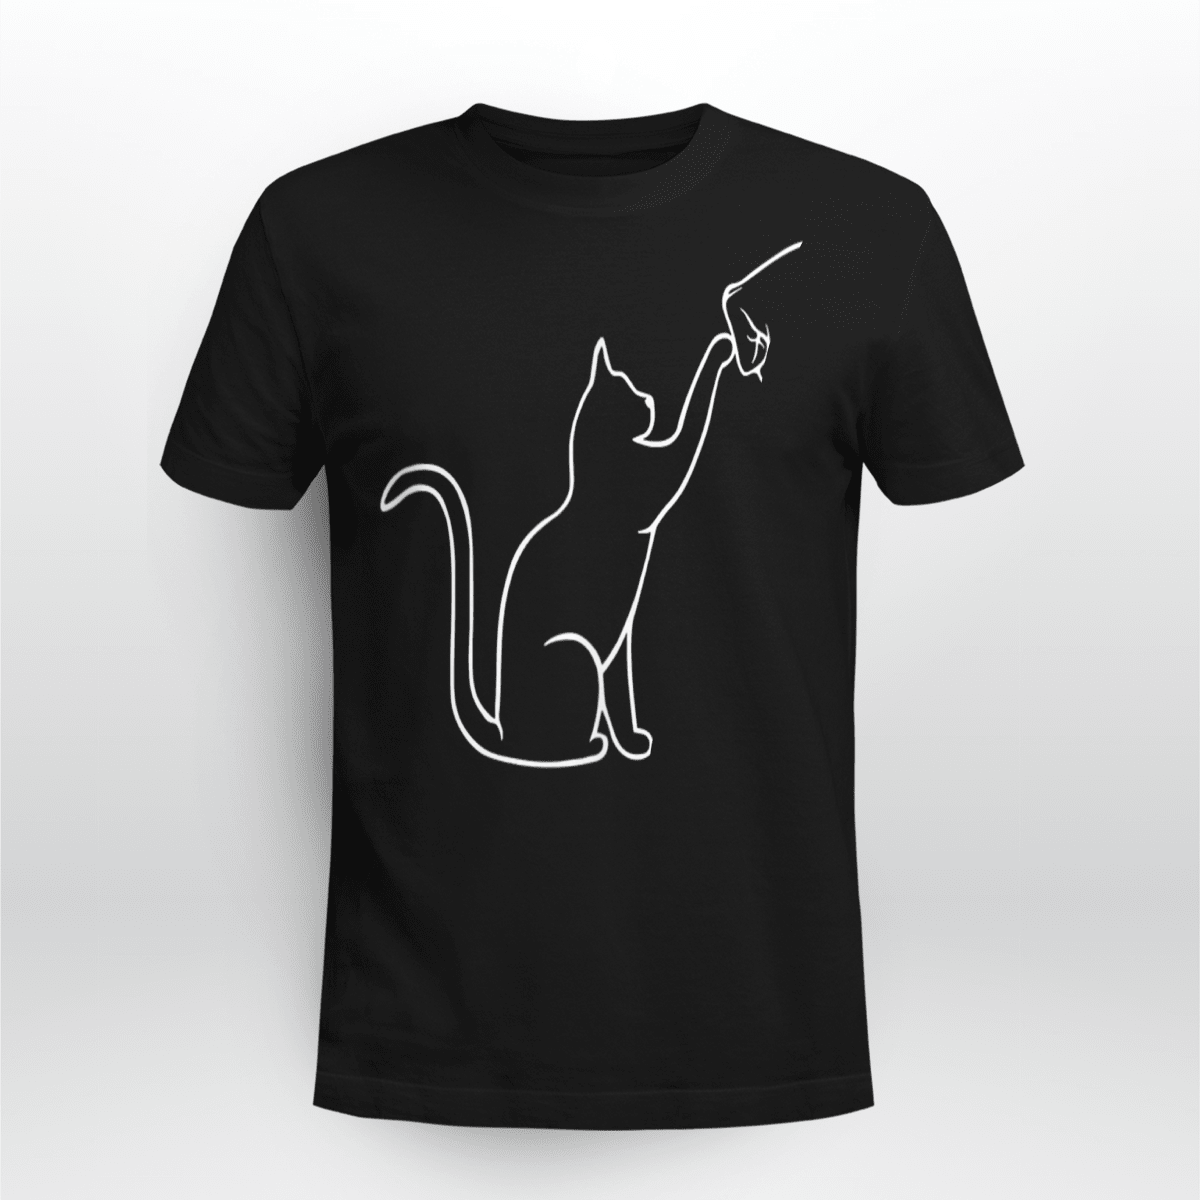 This discount is for you : Cat Fist Bump T-Shirt